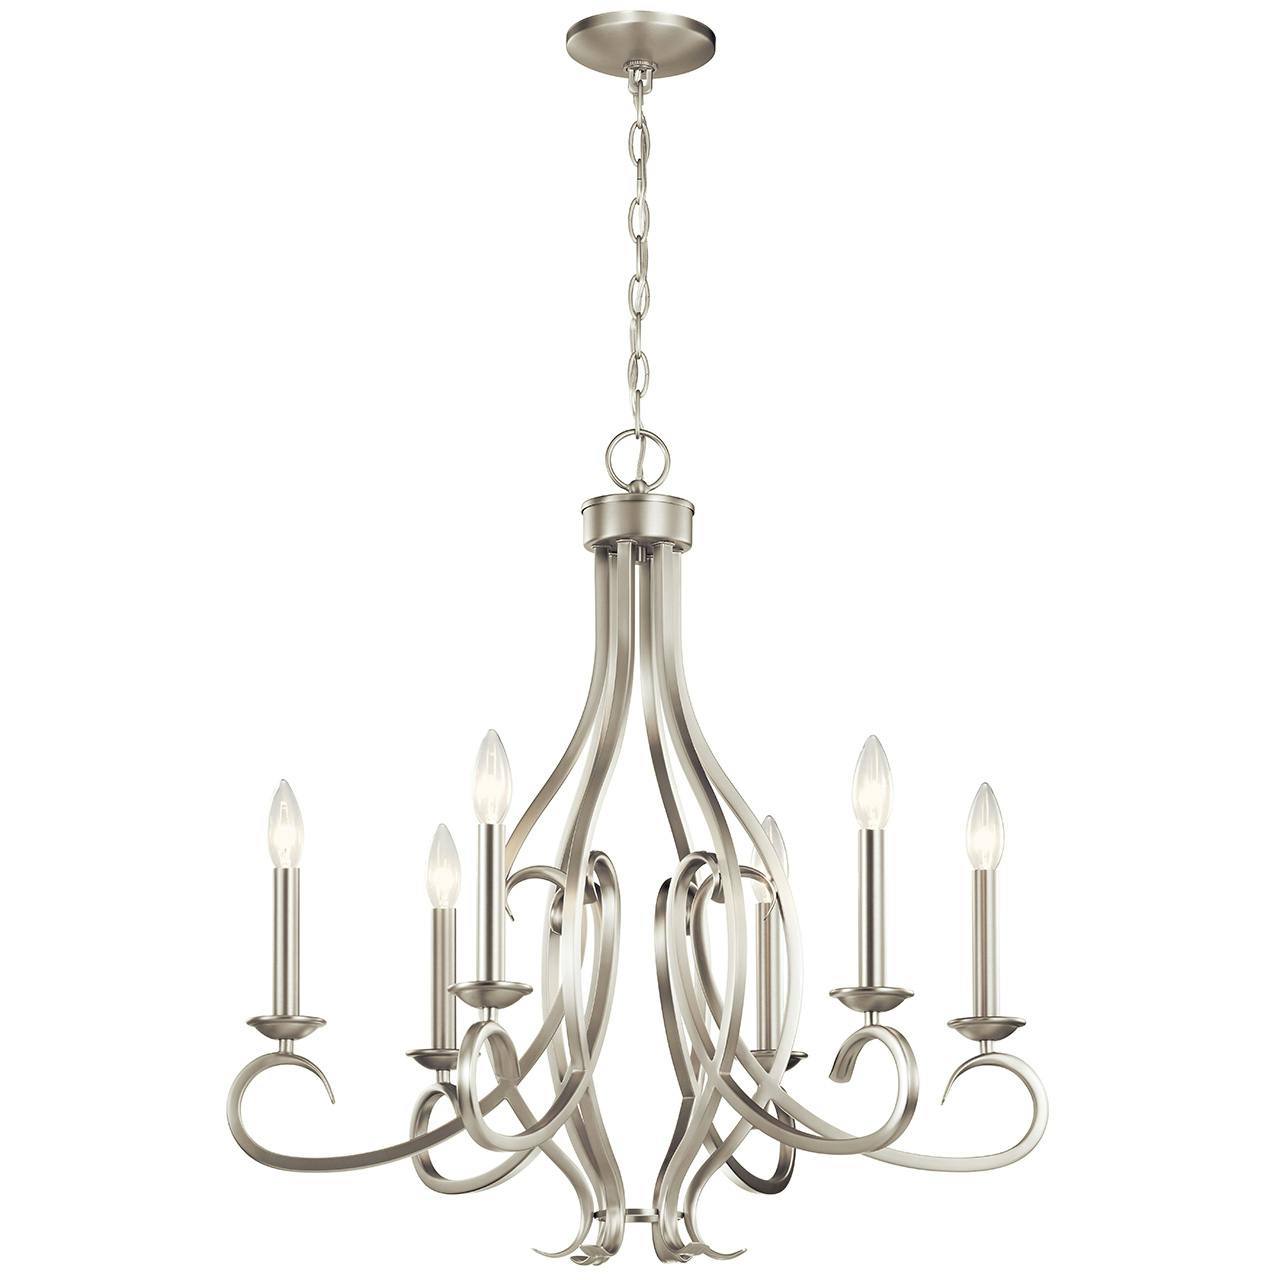 Ania 6 Light Chandelier Brushed Nickel on a white background